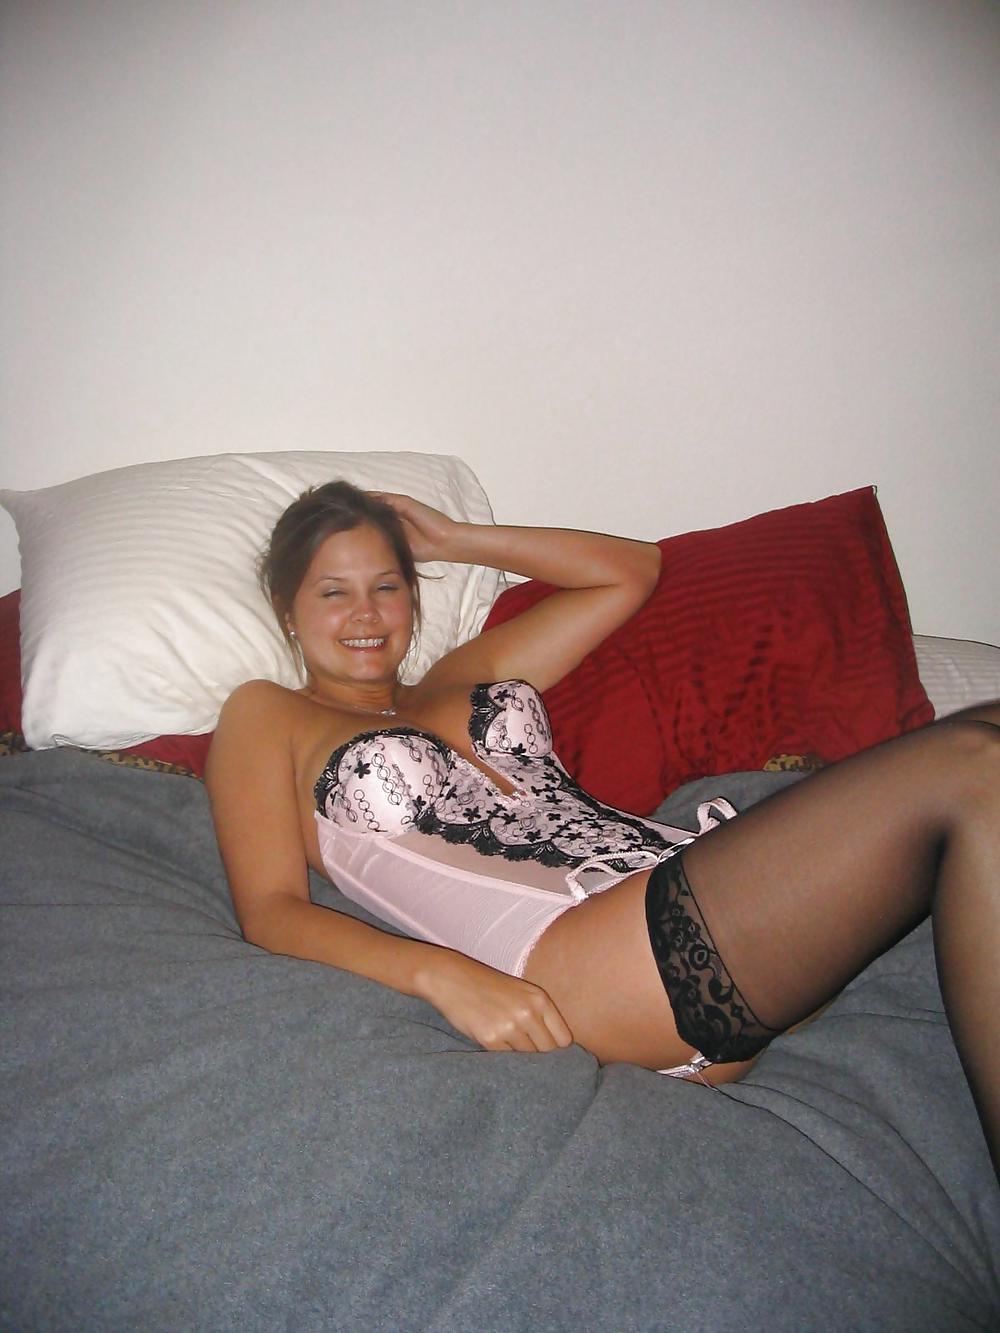 Sexy Amateur girls and woman wearing stockings porn gallery